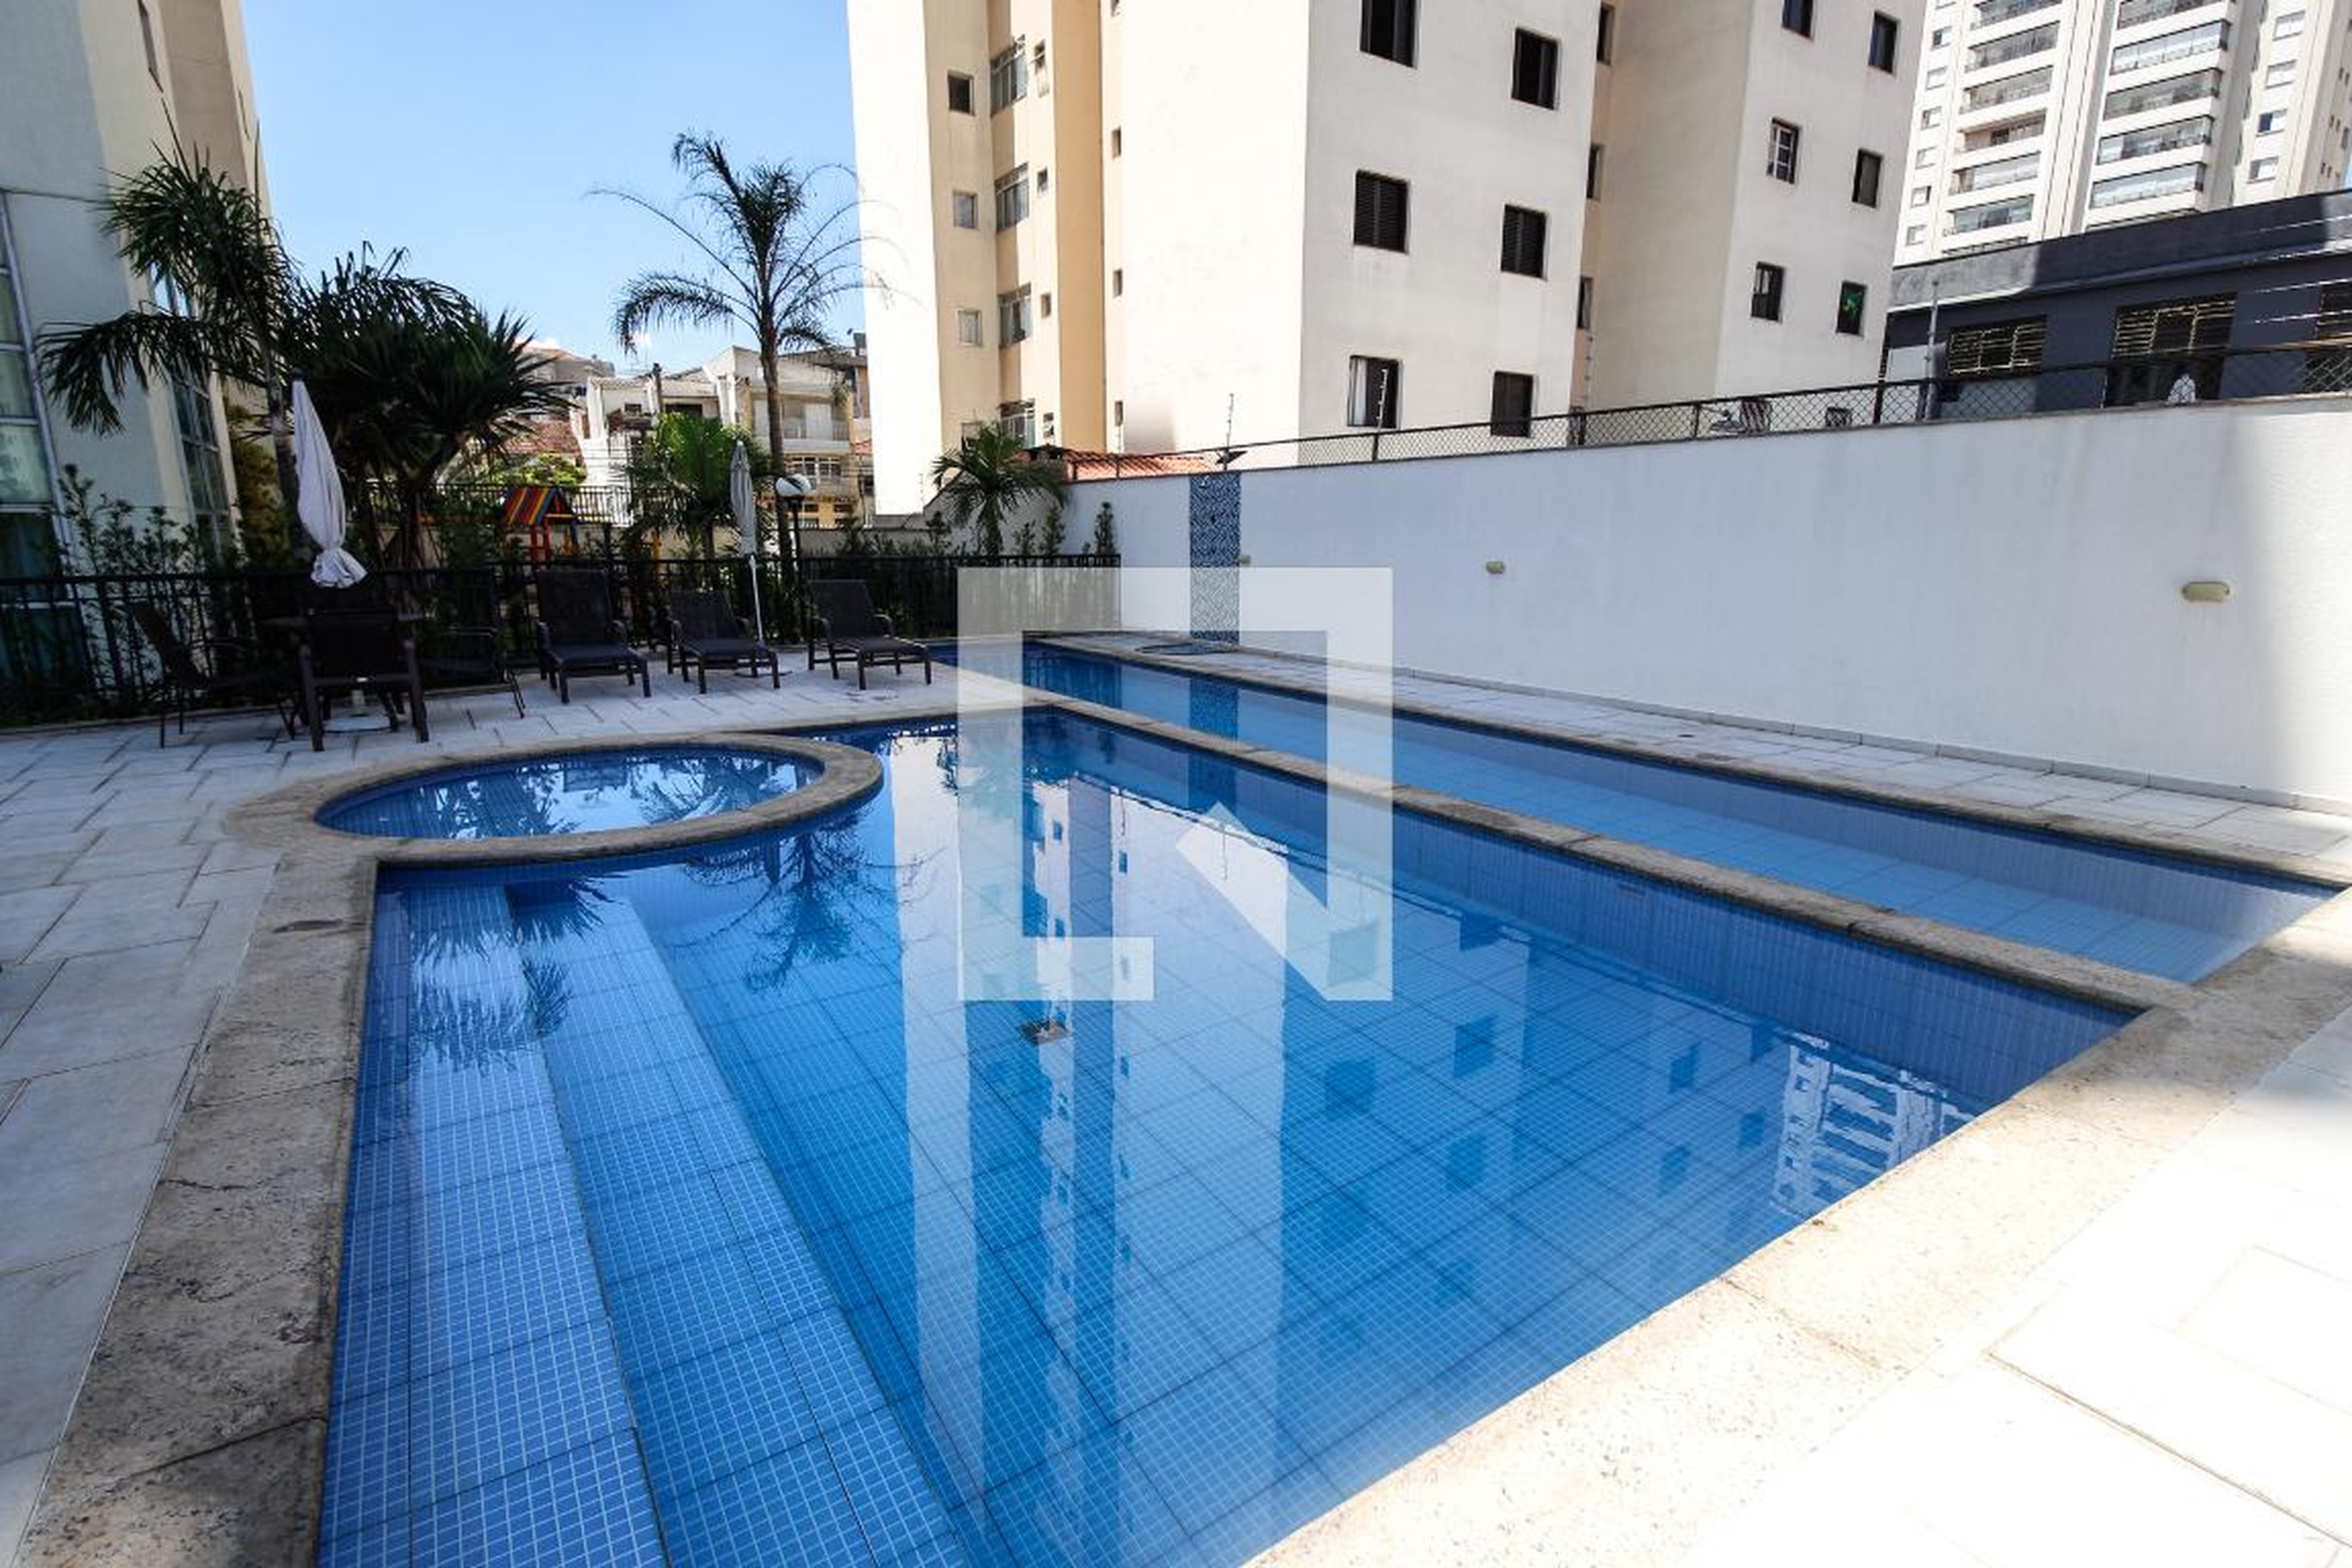 Piscina - Residencial Overview